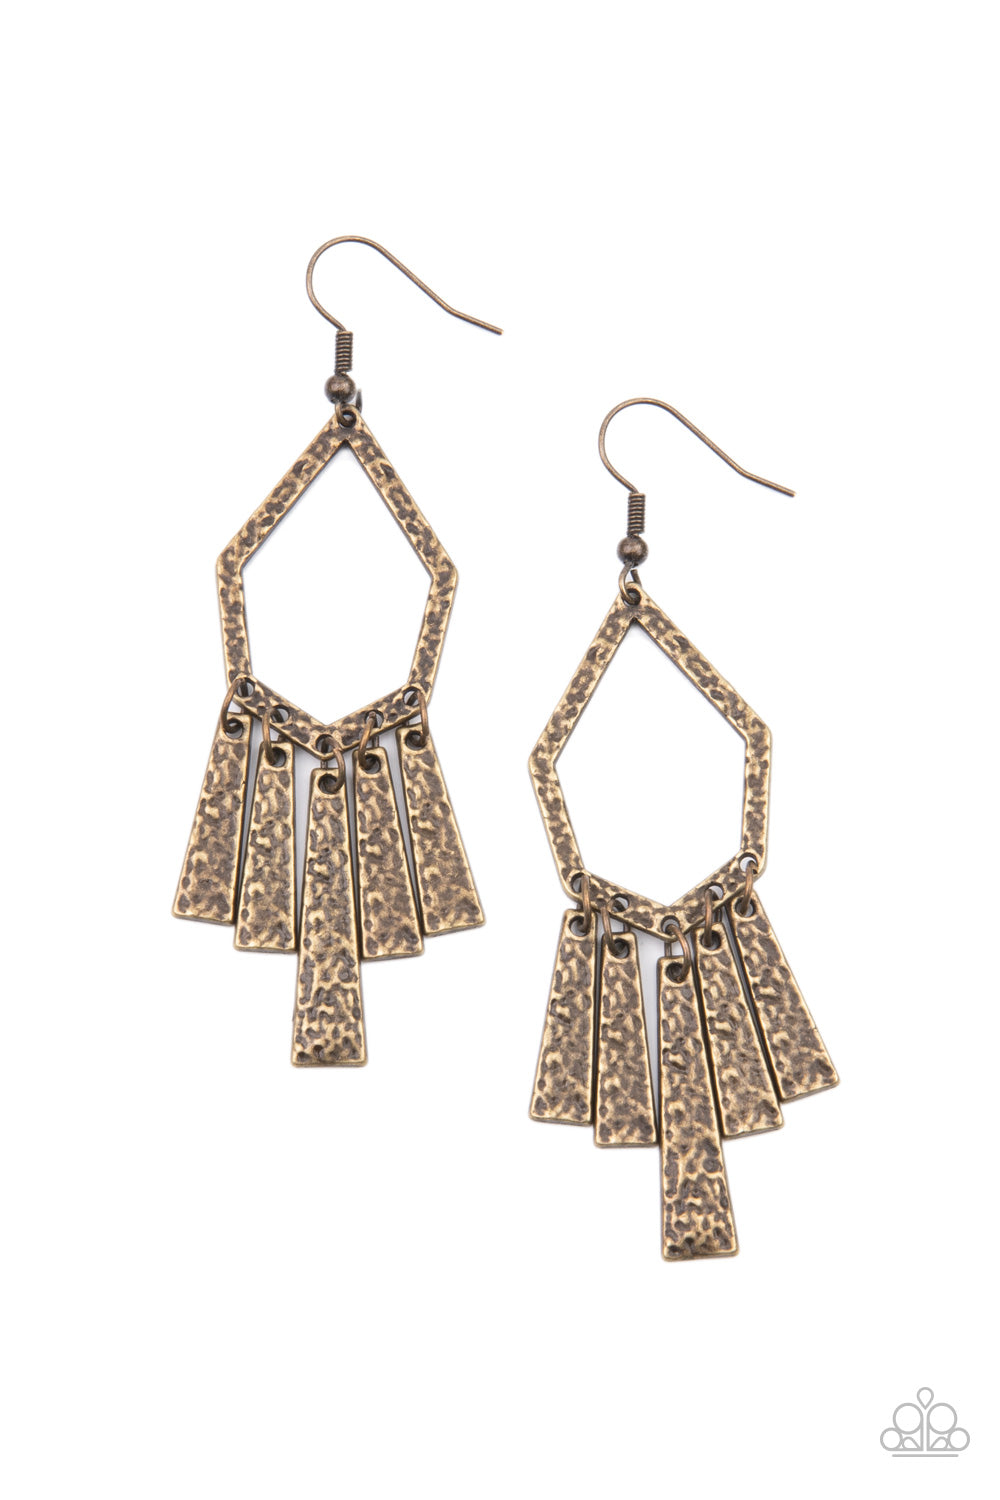 paparazzi-accessories-museum-find-brass-earrings